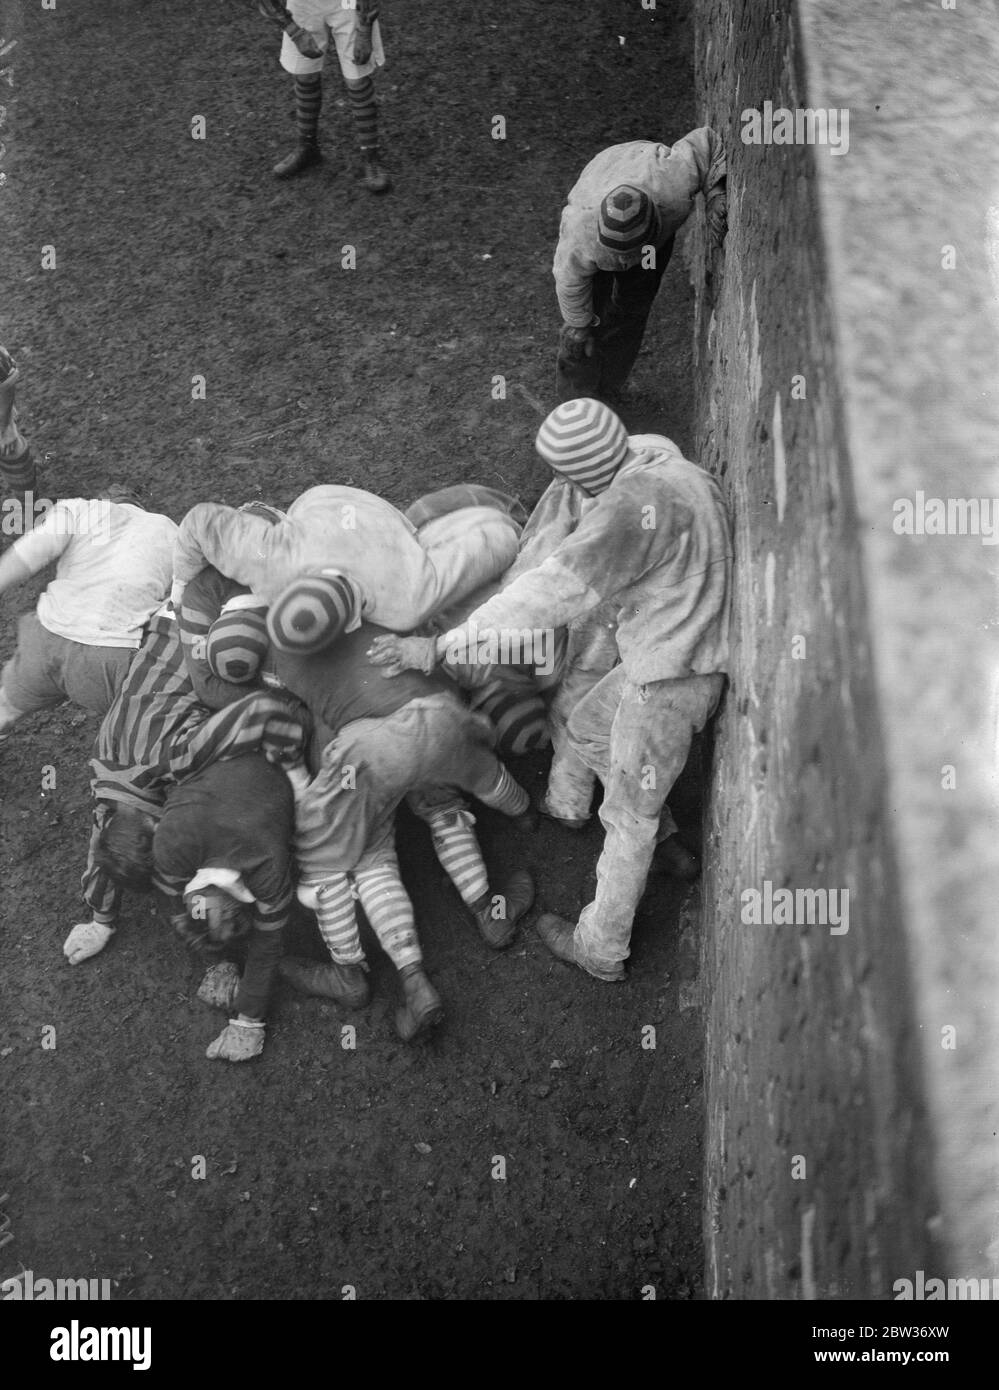 The St Andrew ' s day wall game takes place at Eton . The annual St Andrew ' s day Eton wall games between the Collegers and the Oppidans took place in the grounds of Eton College Windsor . The game was the ninety second . Photo shows ; A view of the wall game scrums from the top of the wall . 30 November 1933 Stock Photo